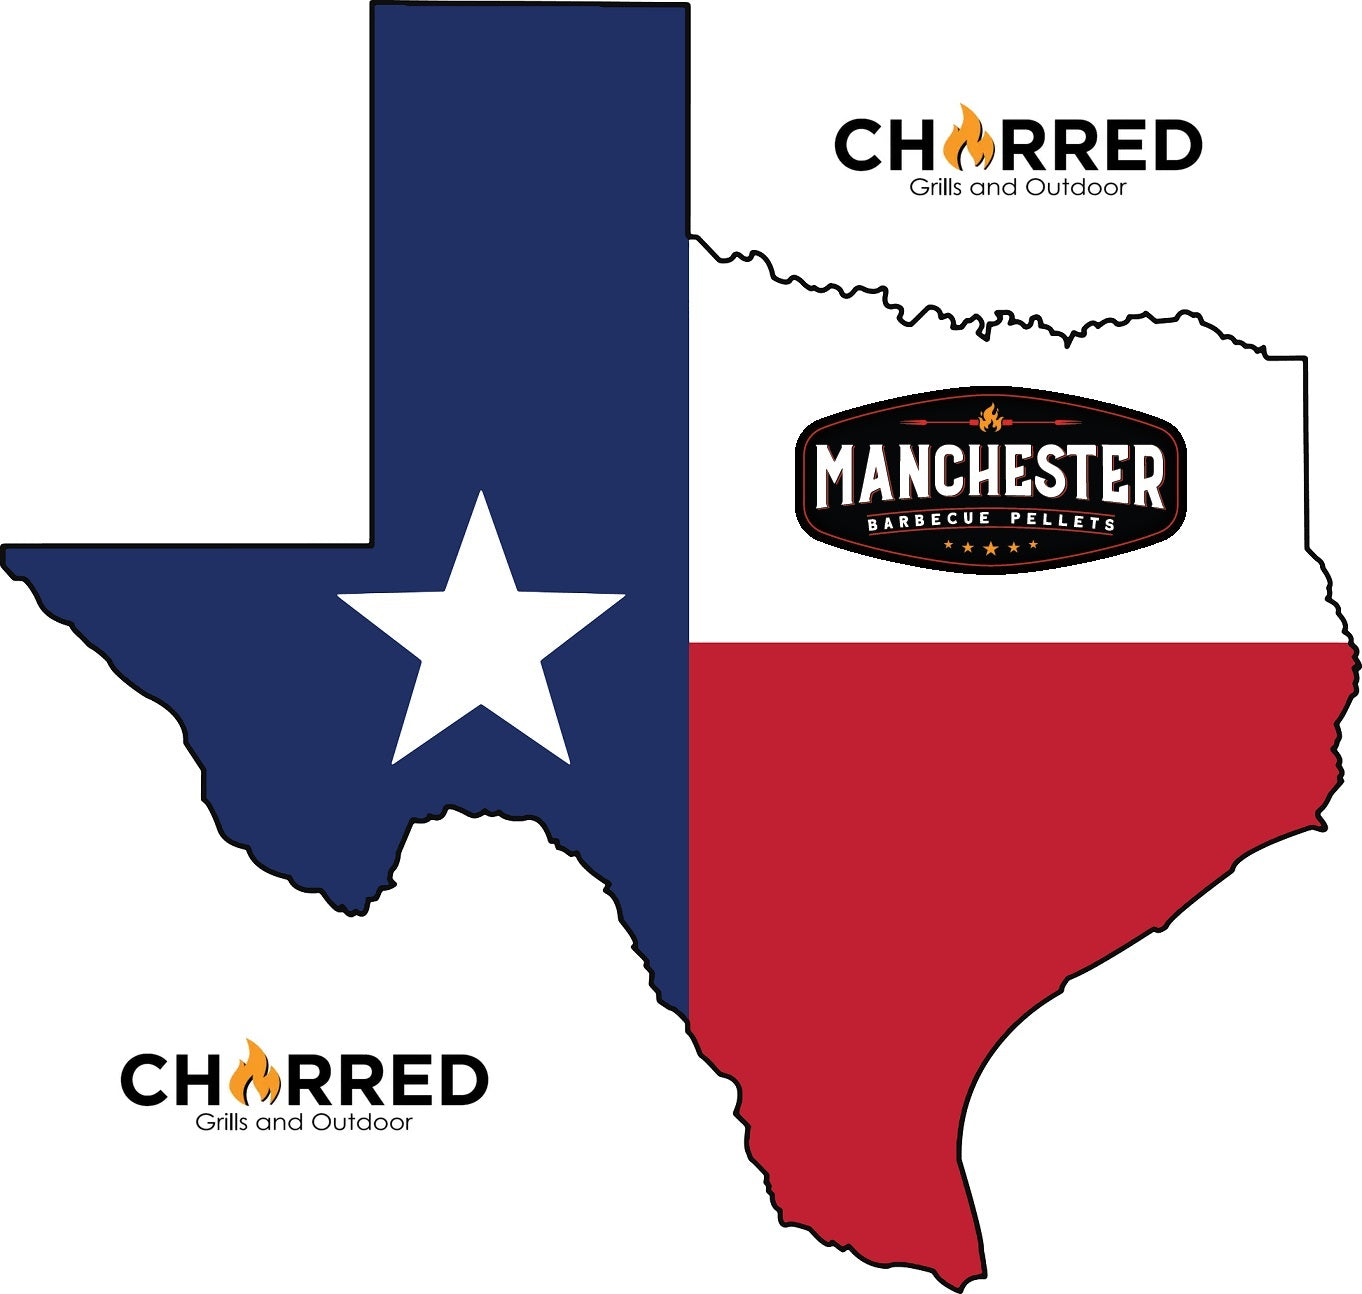 Manchester BBQ Pellets Now Available Texas with Two Locations in McKinney and Gunter!